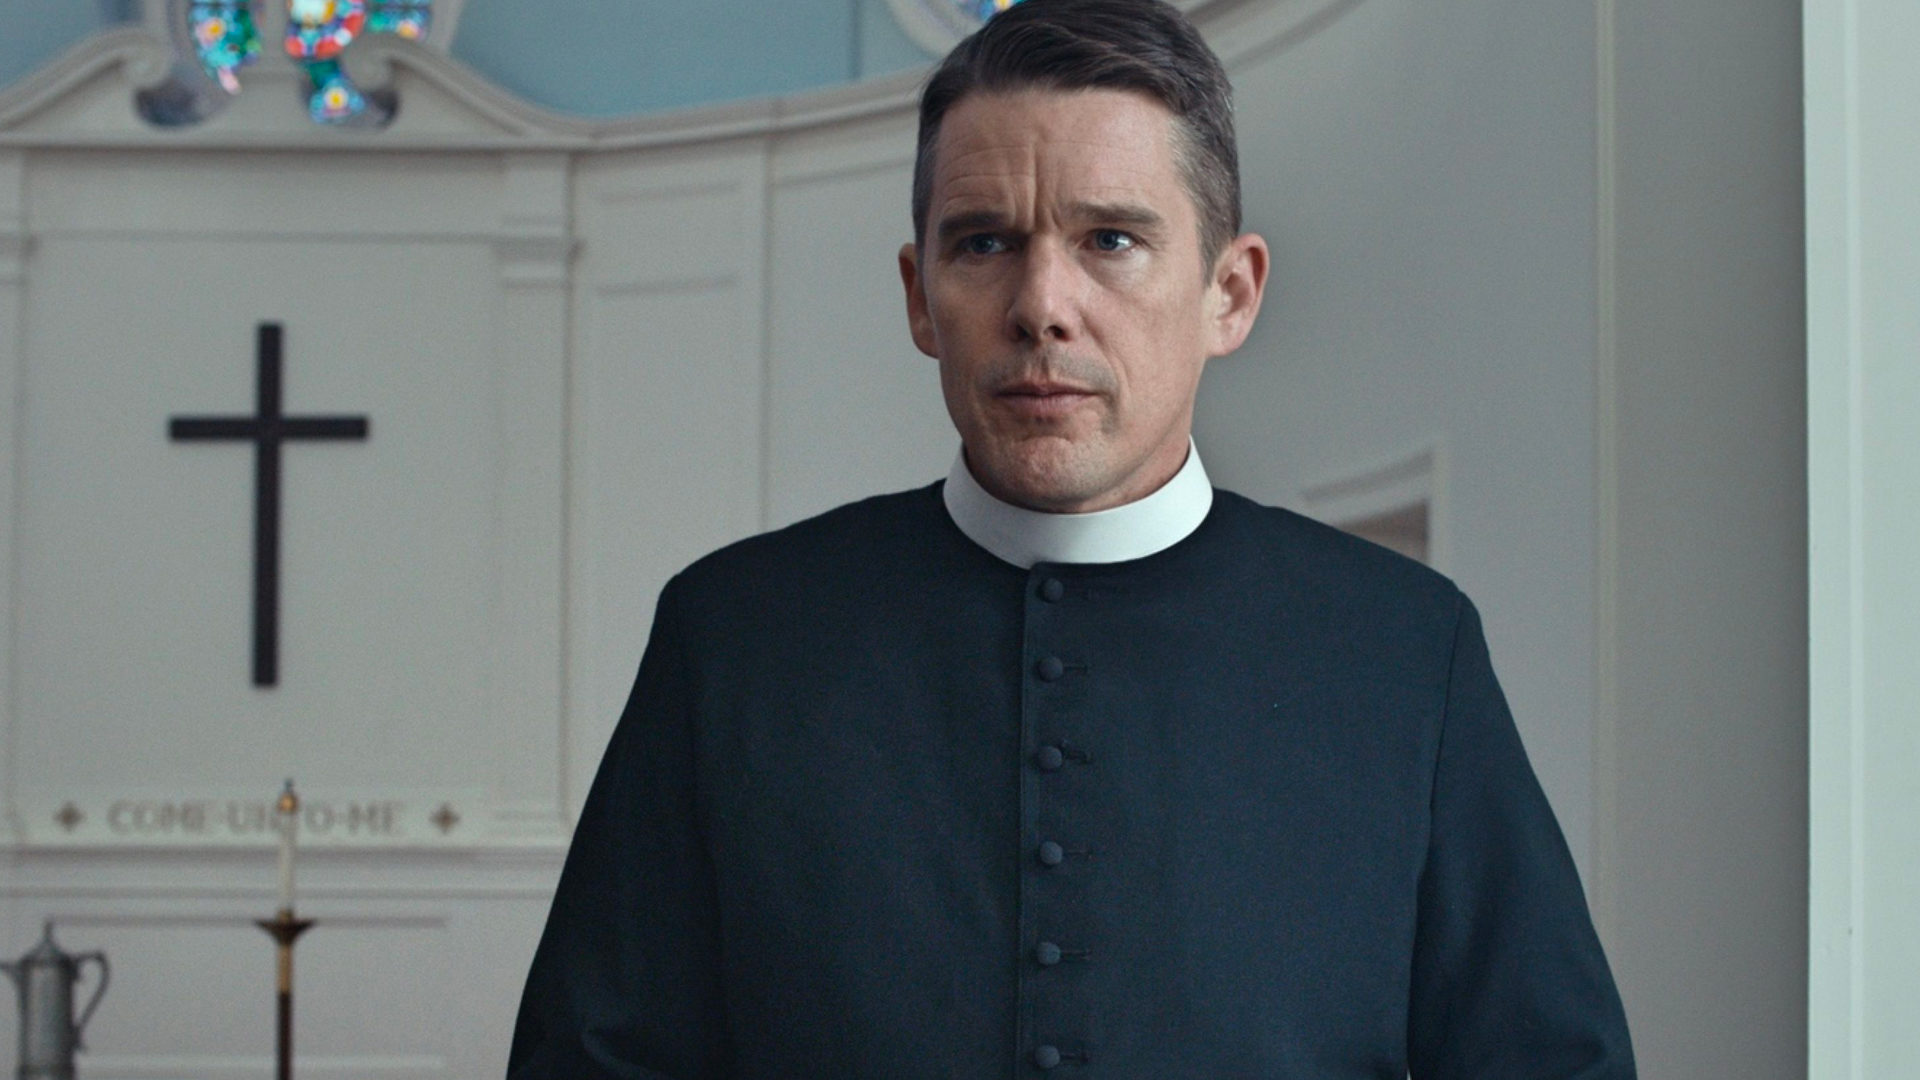 Ethan Hawke, prêtre dans "First Reformed" | © Universal Pictures